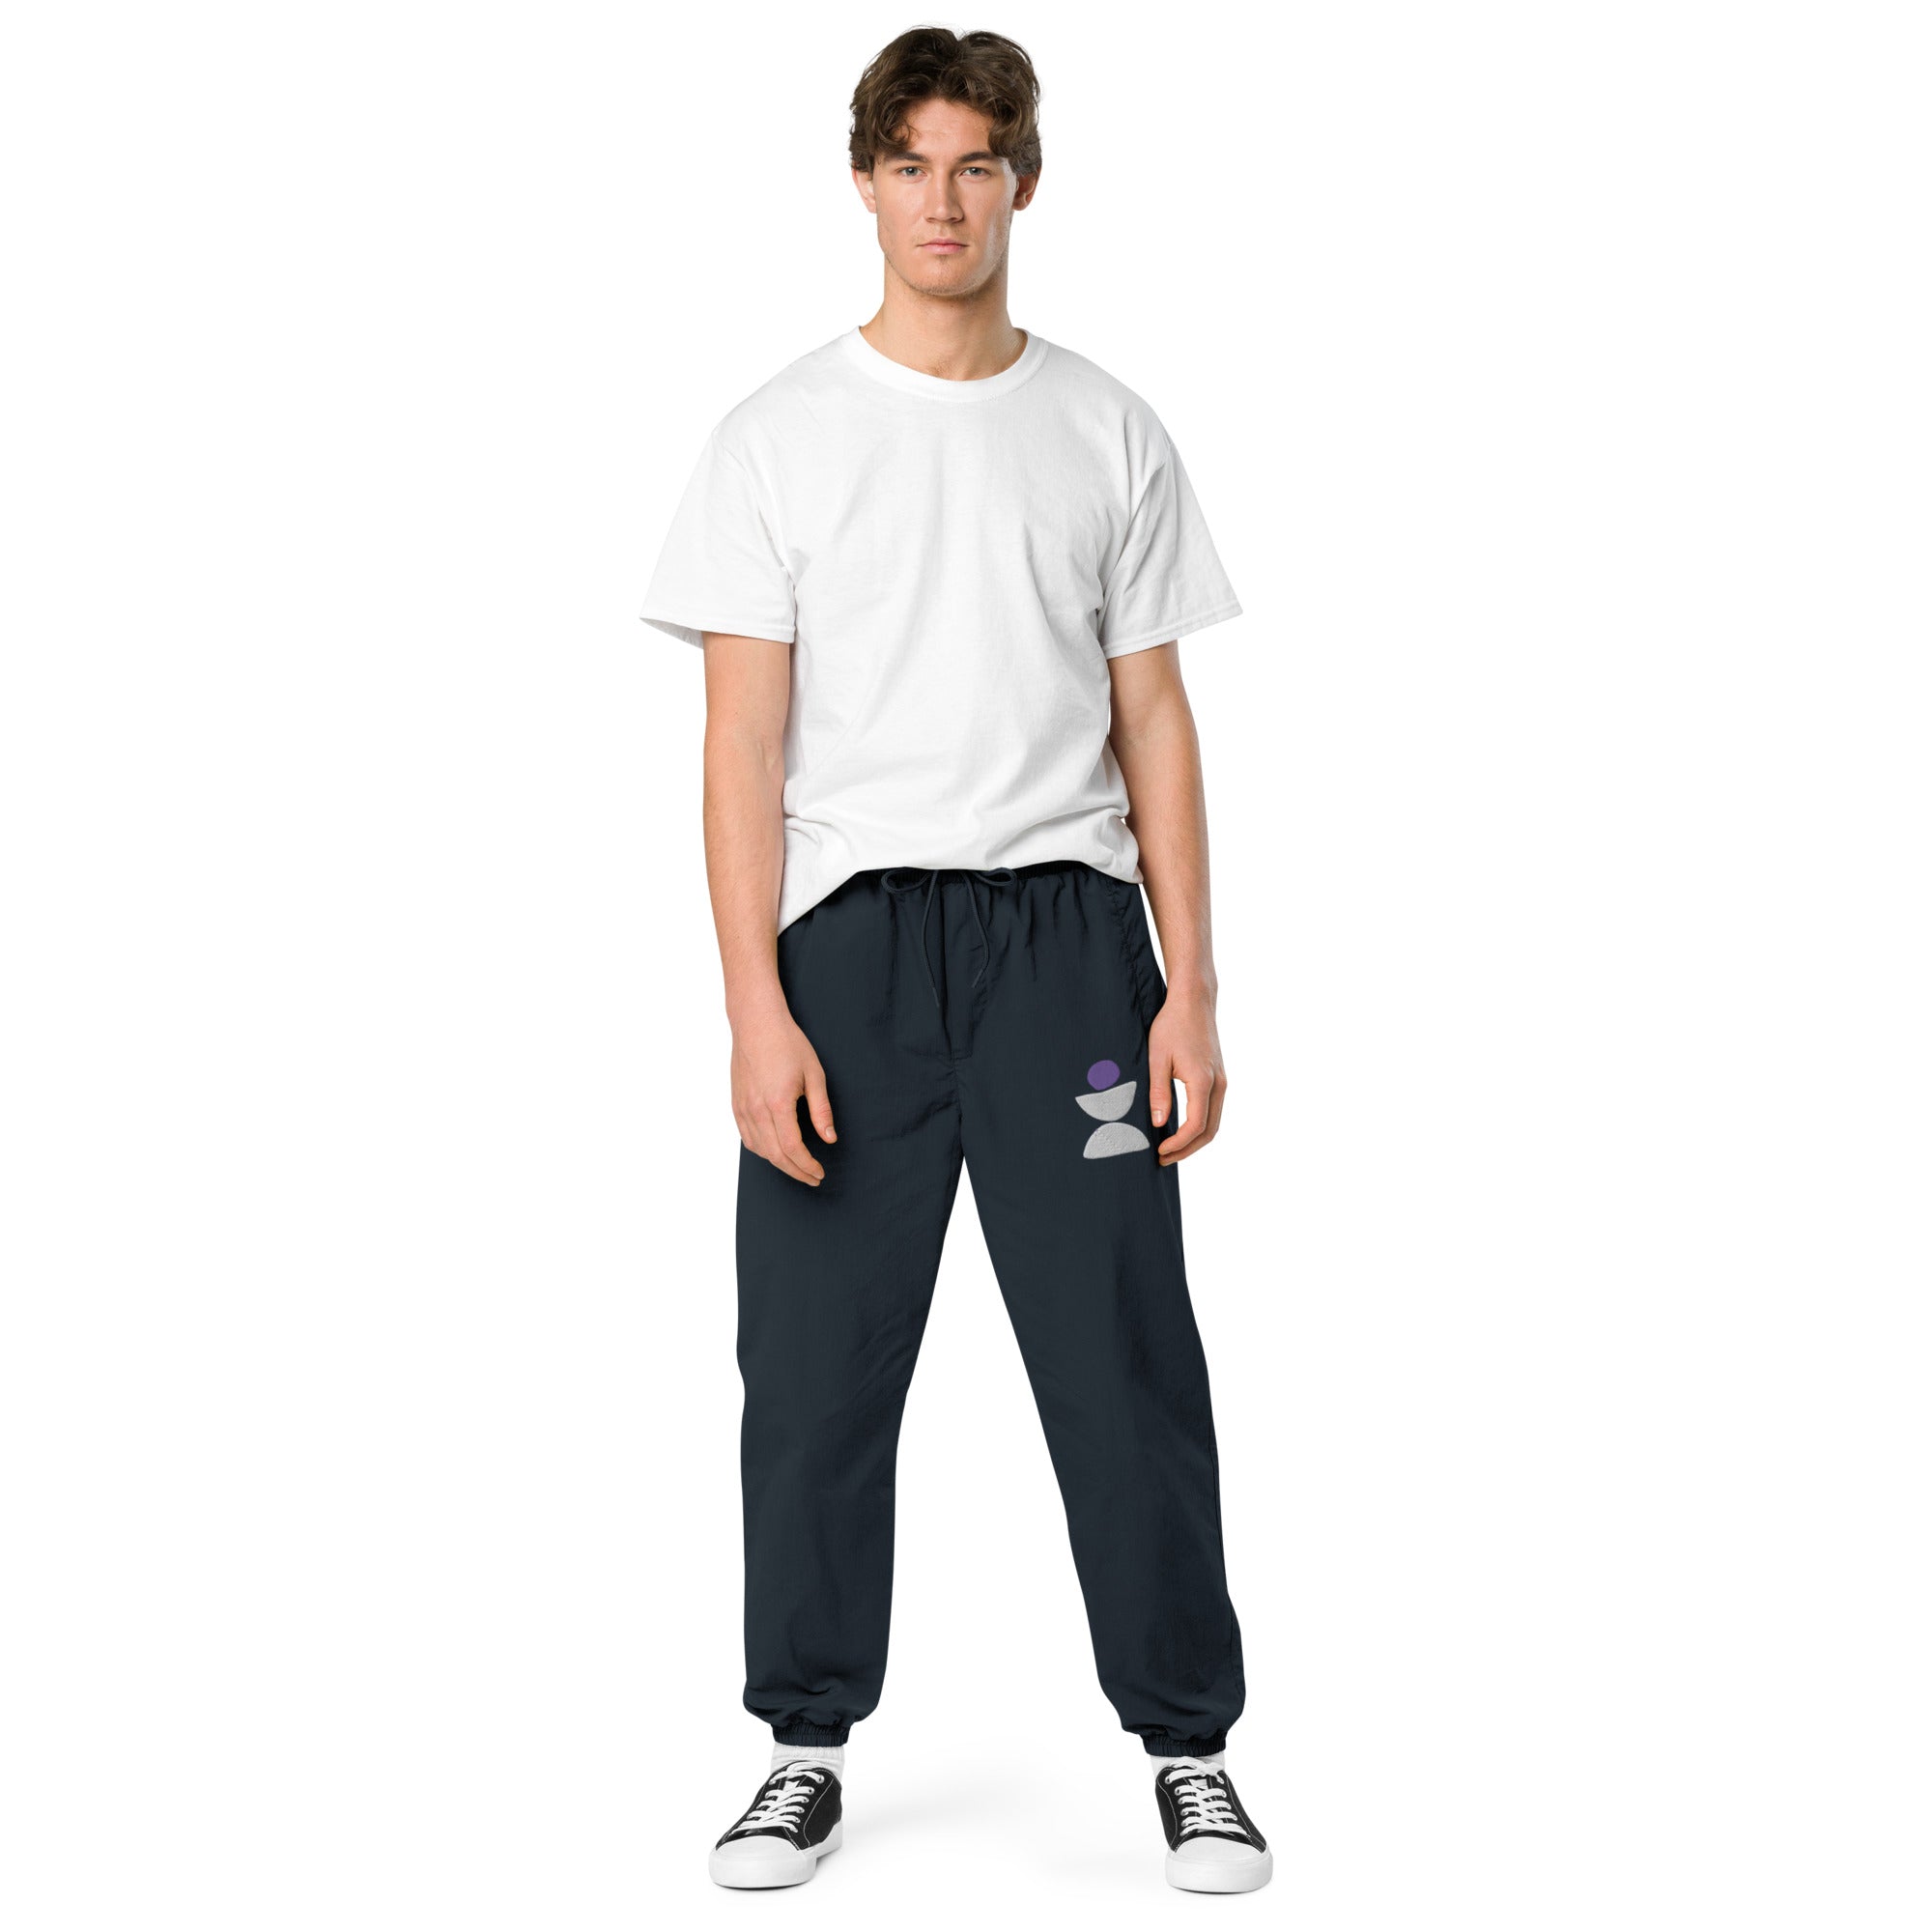 Zen Mastery - Recycled tracksuit trousers for zen and yoga - Personal Hour for Yoga and Meditations 